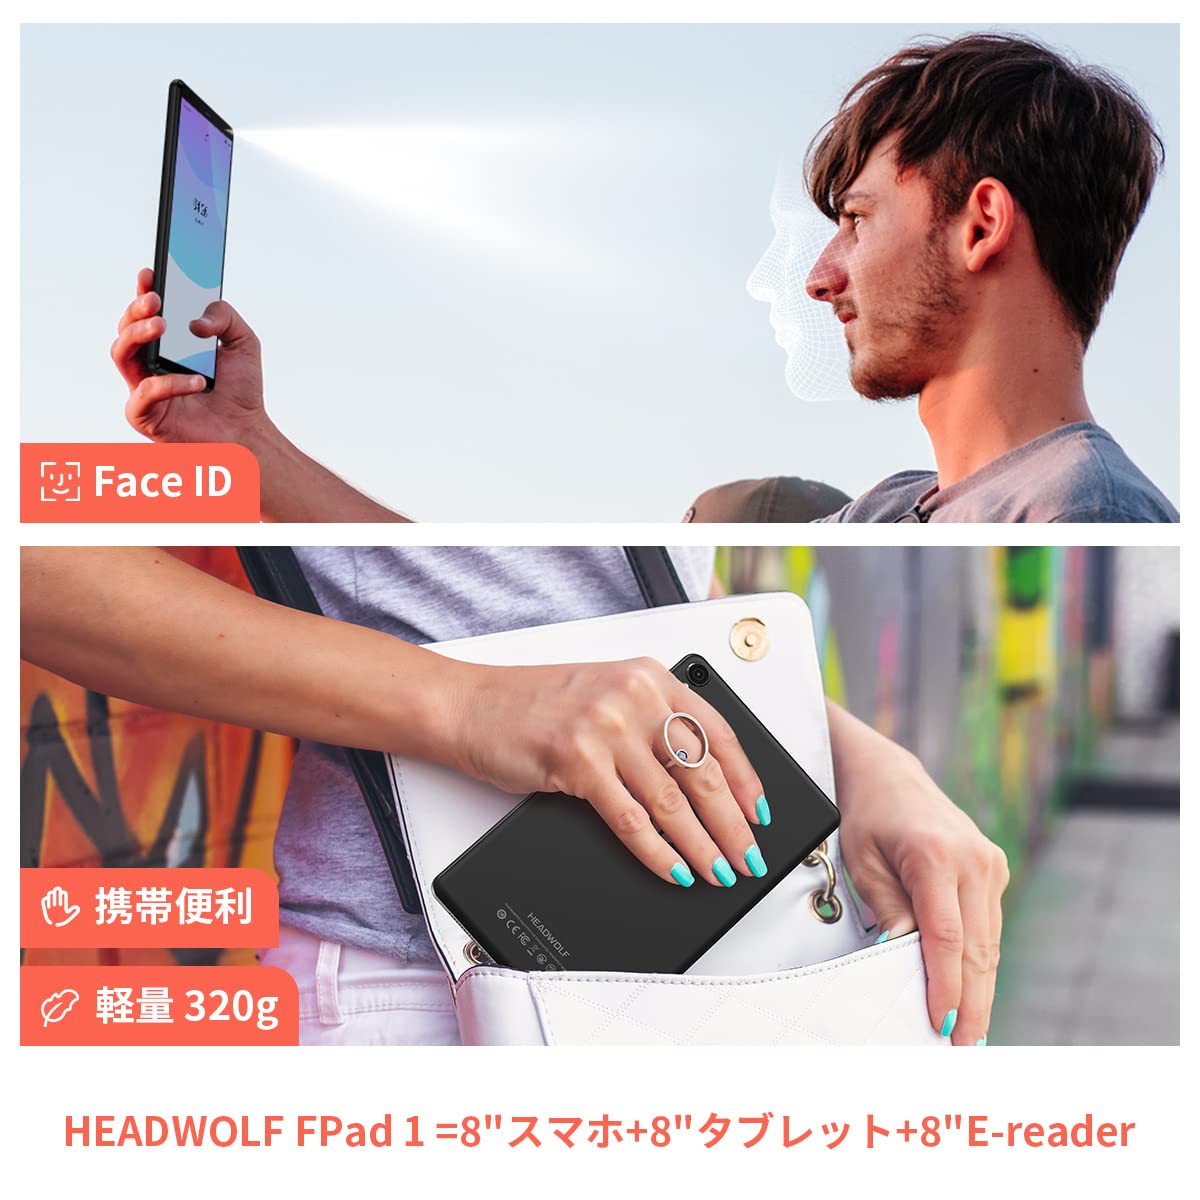 Headwolf Tablet 8 inch Android 11 Tablet FPad1, 3GB RAM+64GB ROM(TF 512GB),2.0GHz 4 core CPU UNISOC T310,800x1280 HD IPS,2.4G/5G WiFi,2 Speaker,BT 5.0,5+5MP Camera,4000 mAh/GPS/Type-C